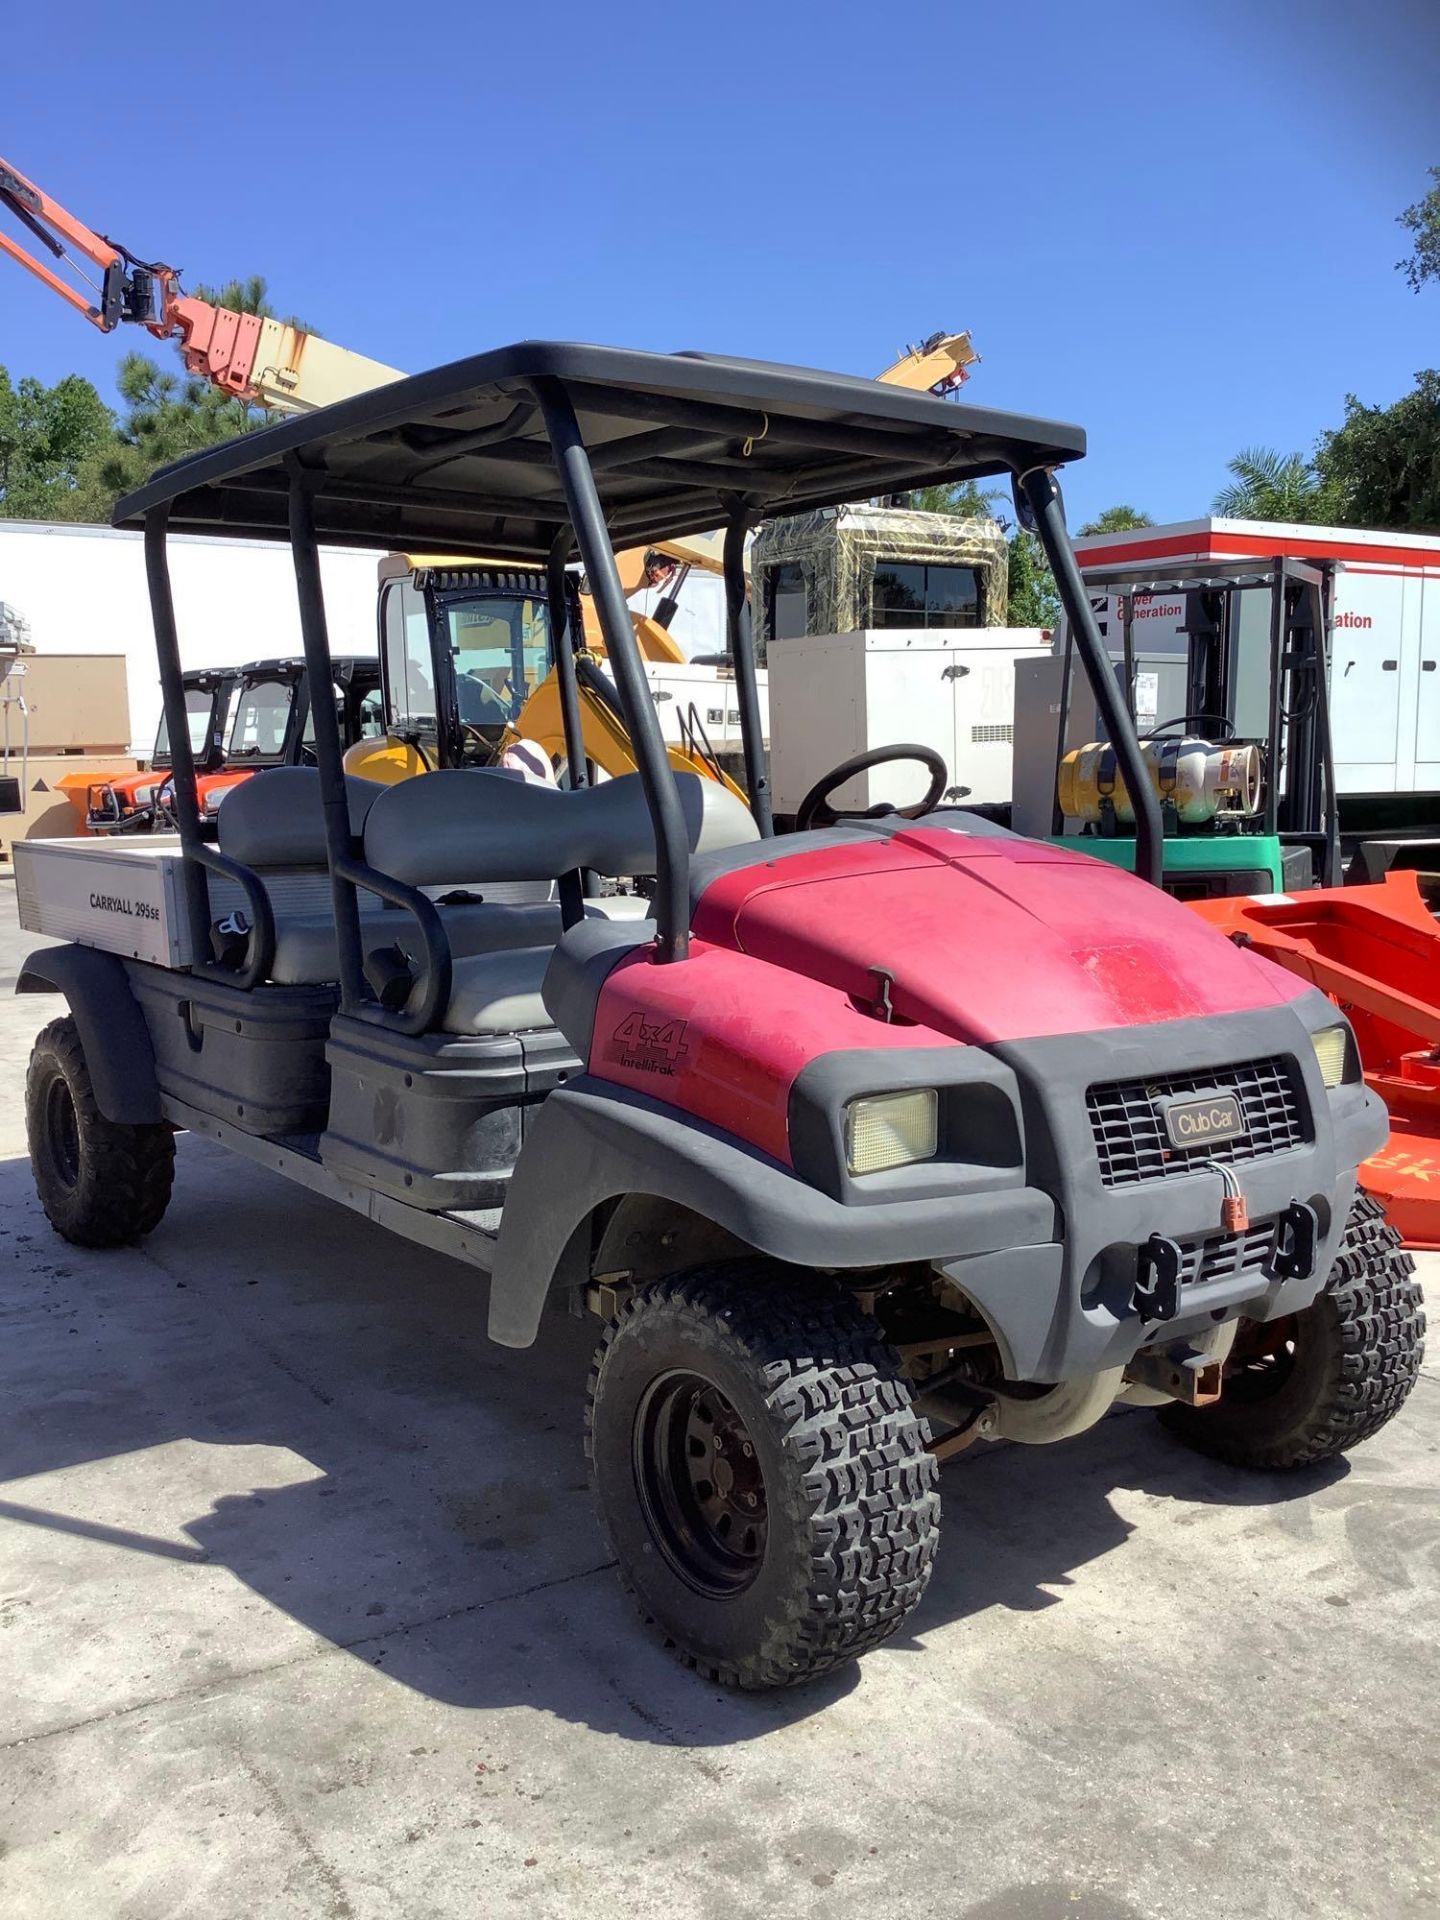 CLUB CAR CARYALL 295SE 4x4 INTELLITRAK GOLF CART, GAS POWERED , MANUAL DUMP BED, HITCH IN FRONT & BA - Image 3 of 19